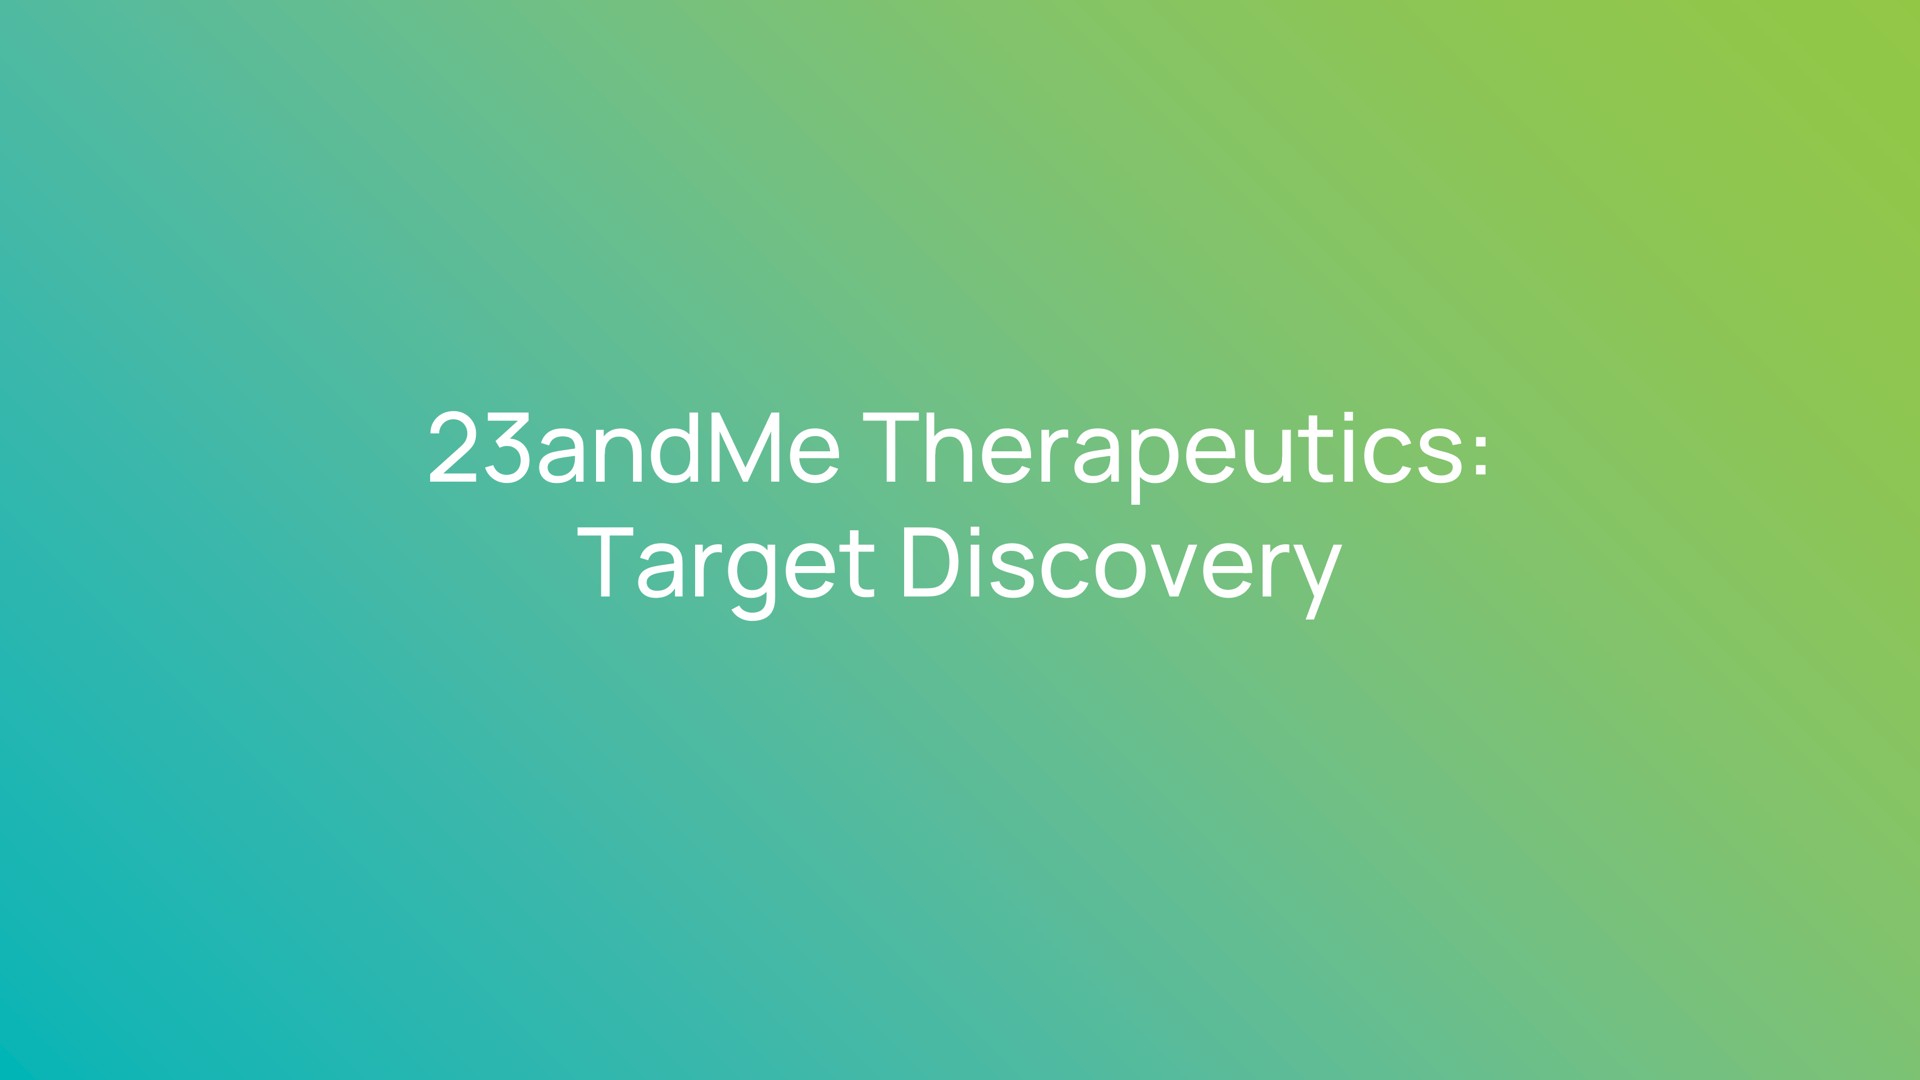 therapeutics target discovery | 23andMe